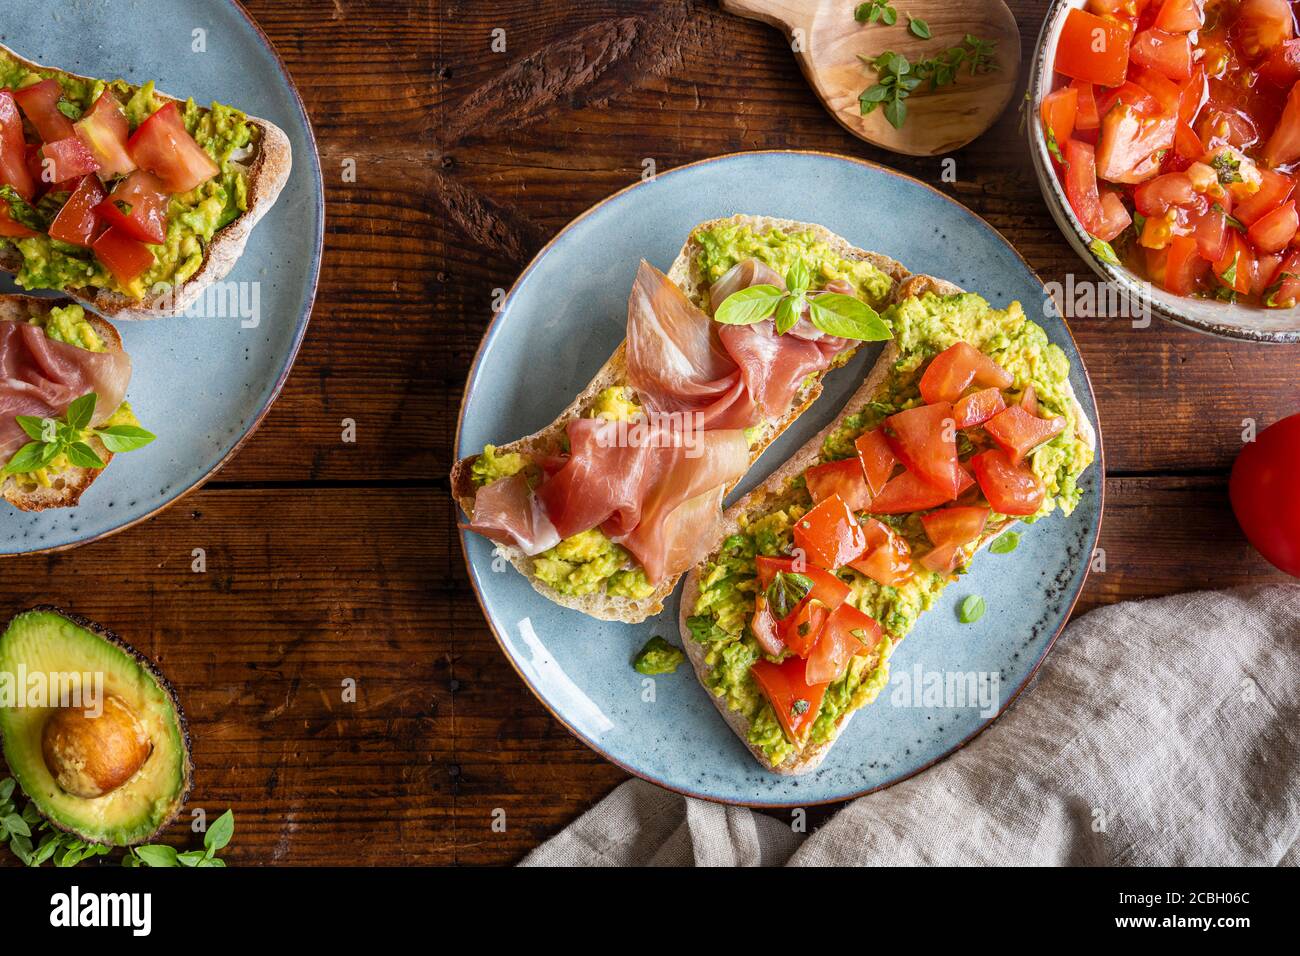 Avocado spread with chopped tomatoes and herbs. Parma prosciutto ham. Healthy breakfast seen from above. The food is on beautiful plates on a dark rus Stock Photo